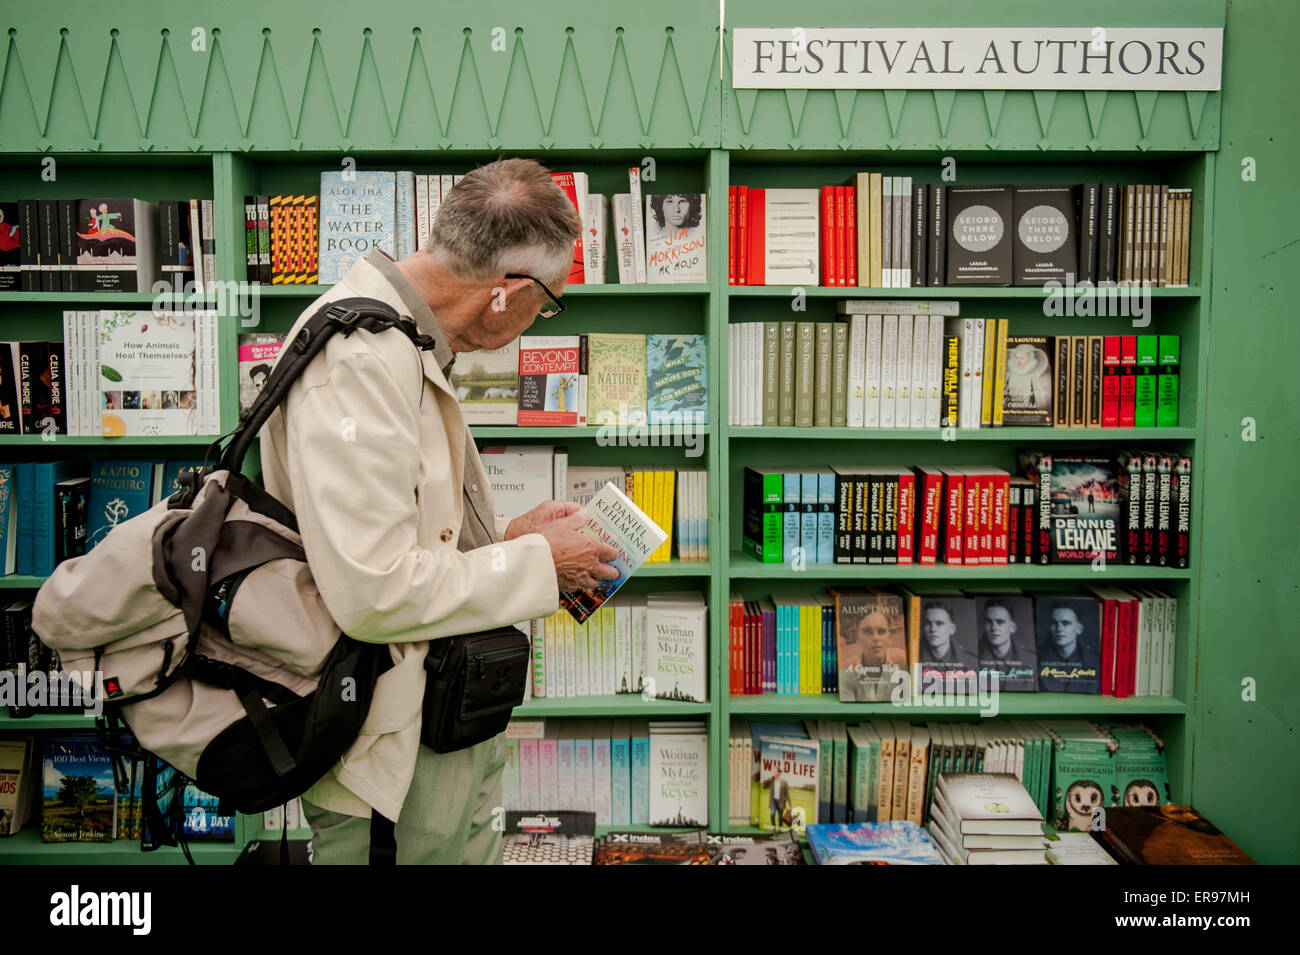 Hay on Wye, UK. Thursday 28 May 2015  Pictured: A man broses books in the bookshop at Hay Re: The 2015 Hay Festival takes place in Hay on Wye, Powys, Wales Stock Photo